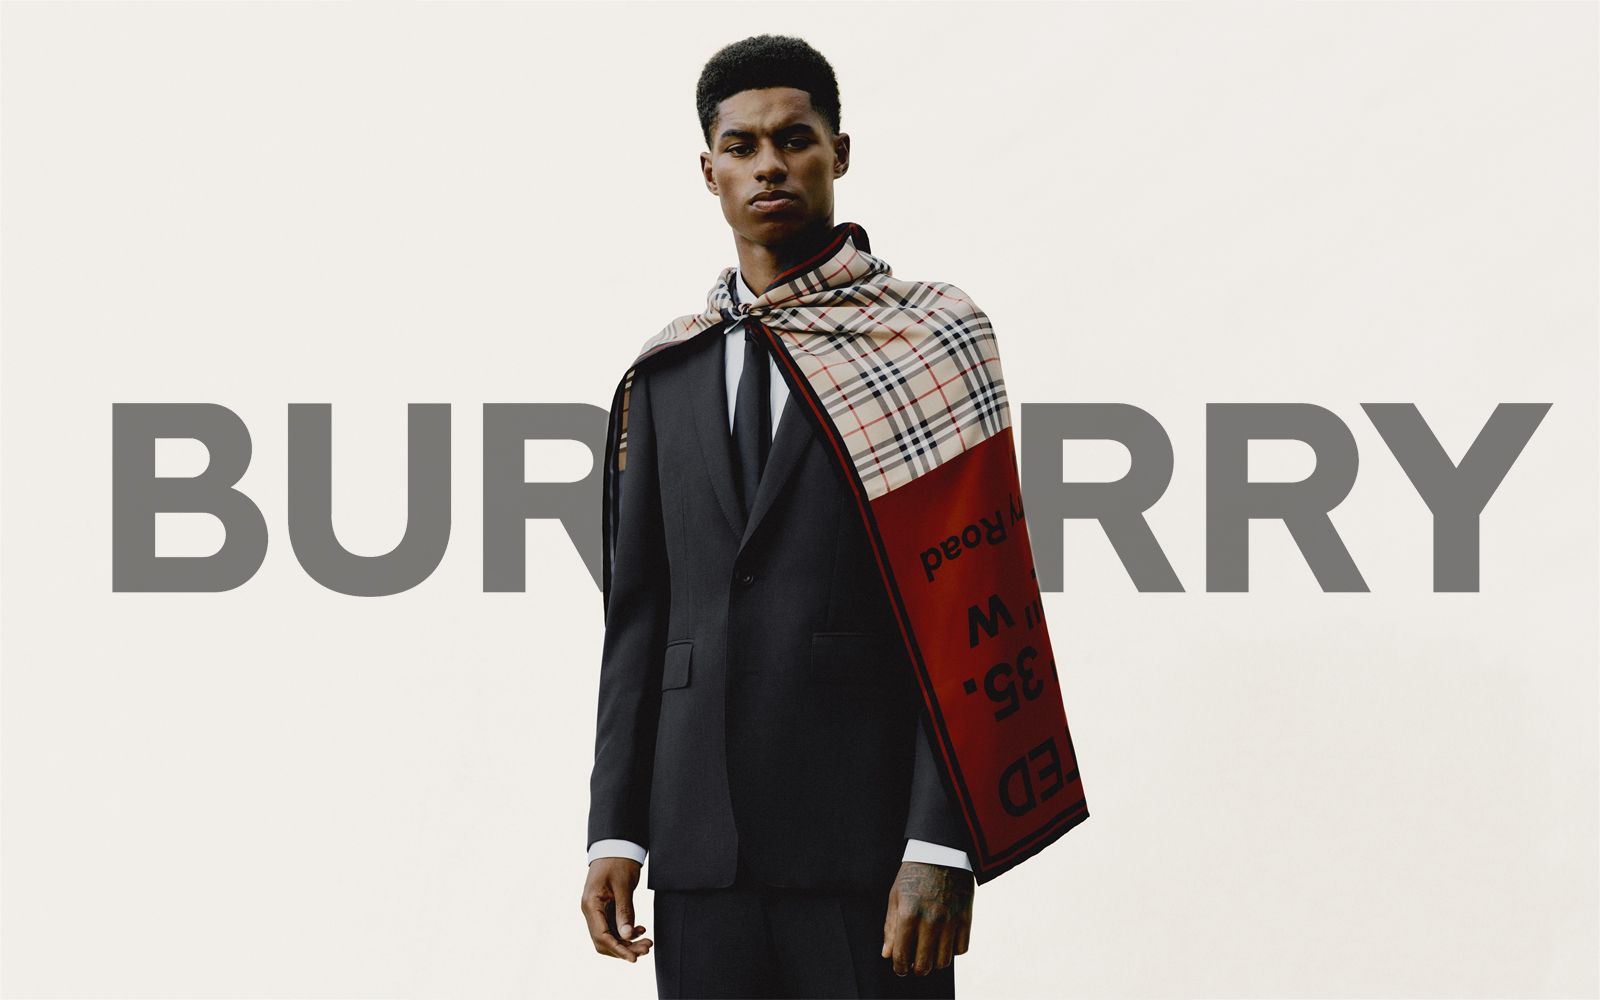 Burberry's charity project with Marcus Rashford